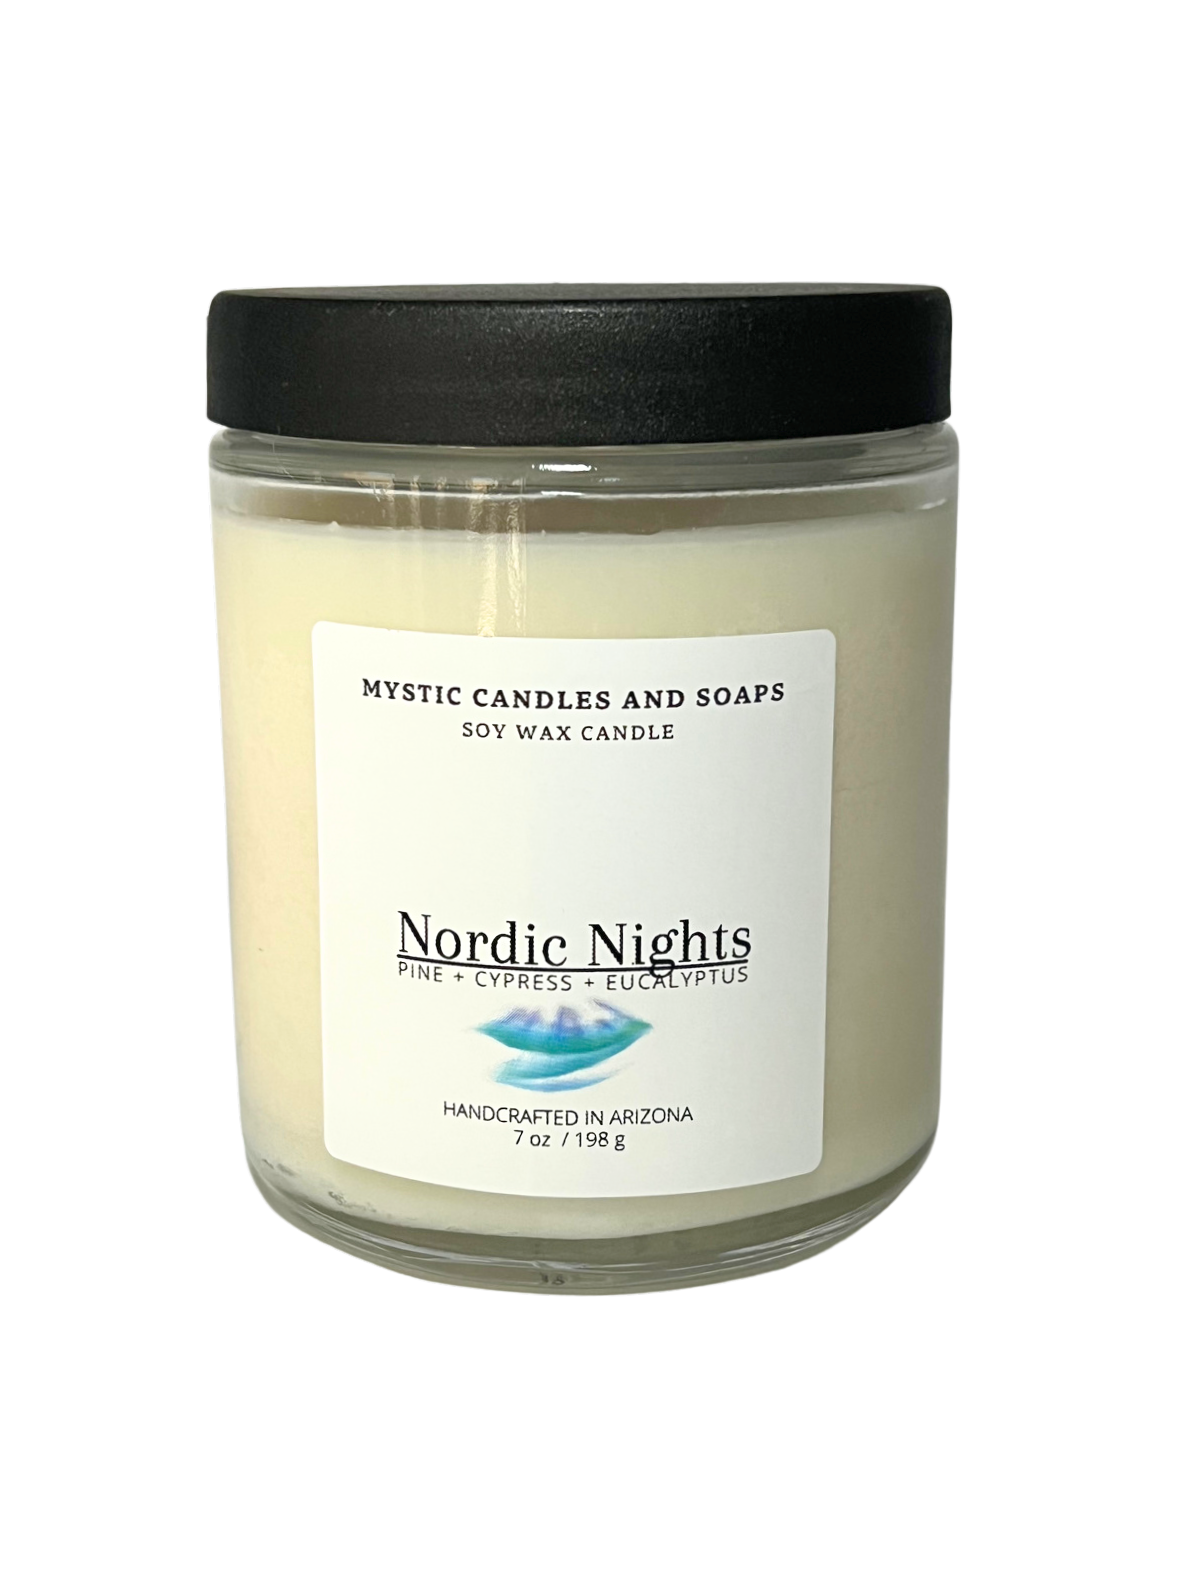 Nordic Nights Candle - Mystic Candles and Soaps LLC